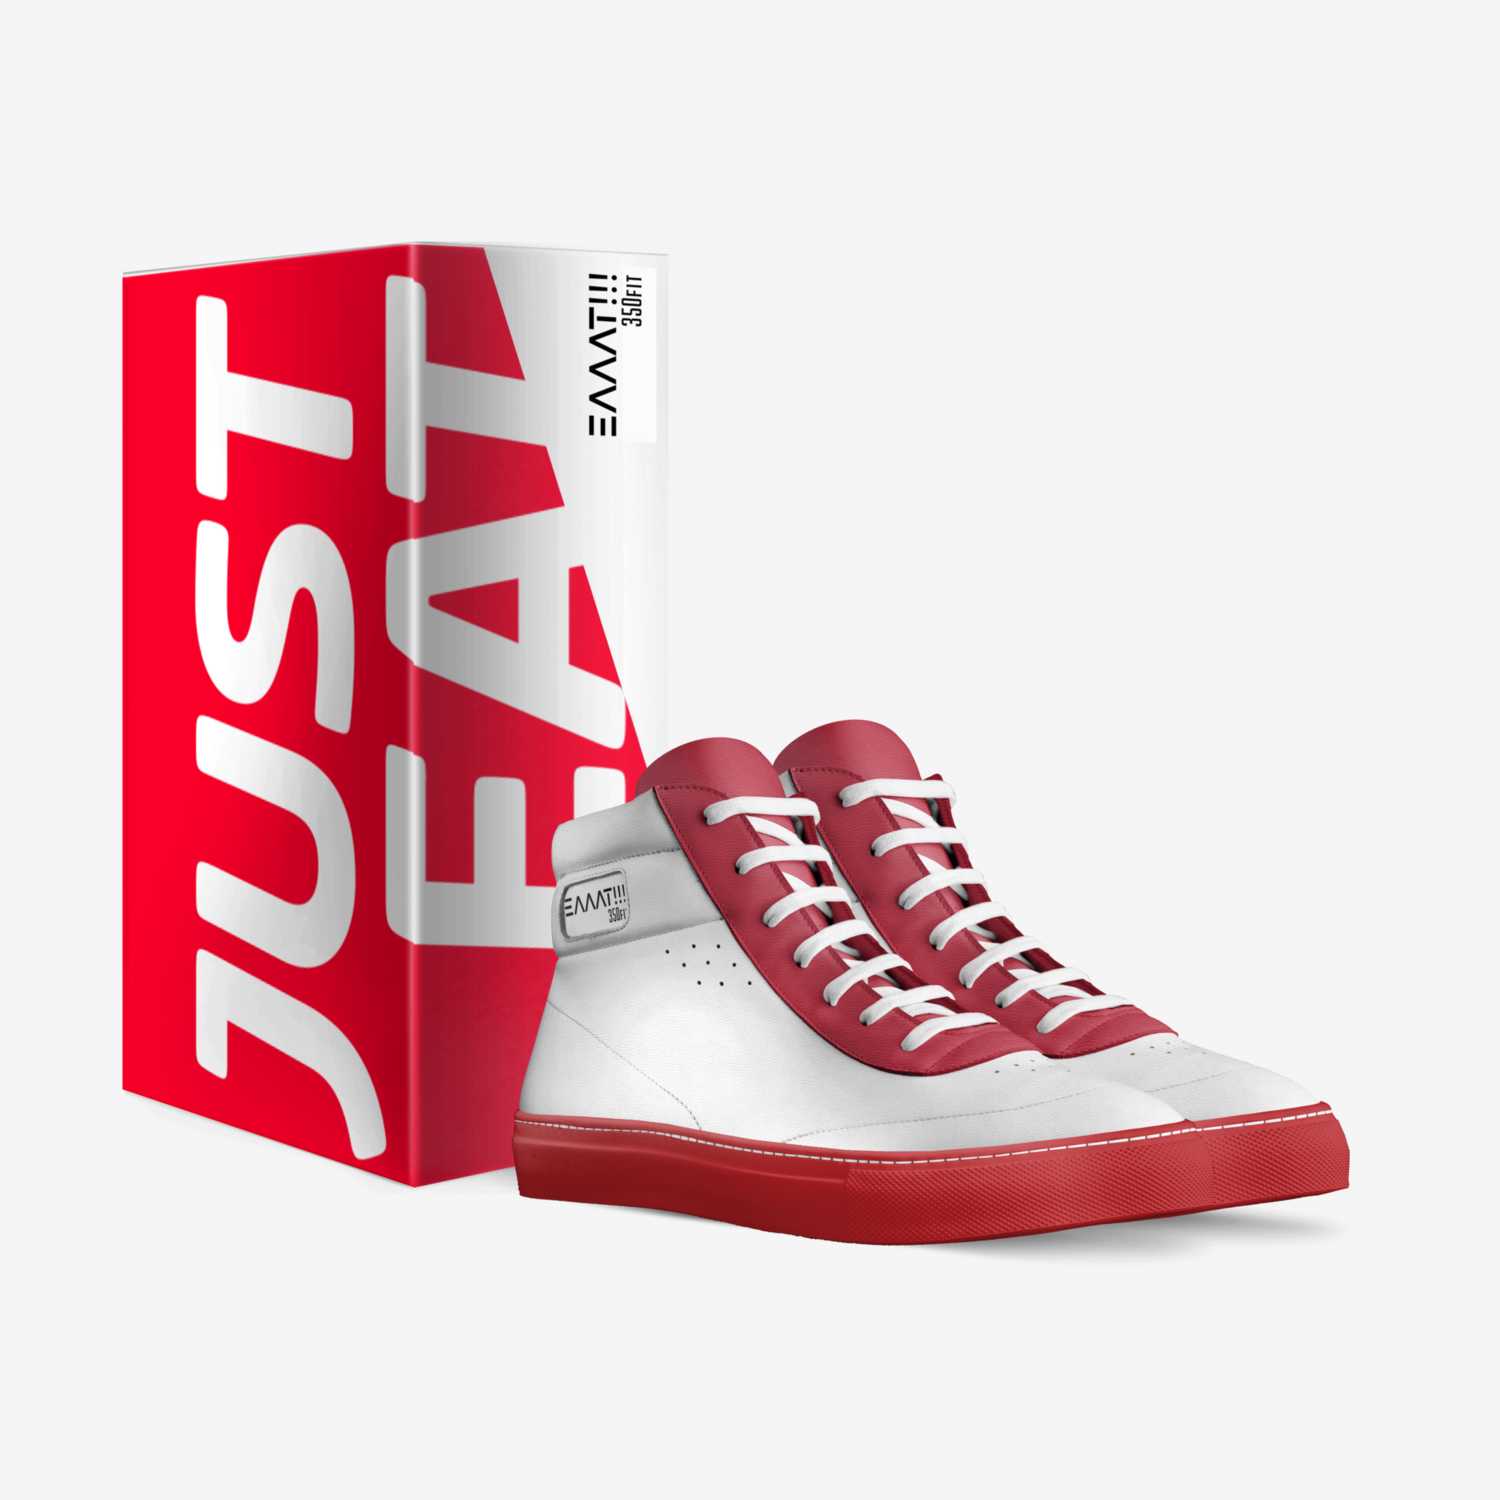 Just “EAAAT” 350’s custom made in Italy shoes by 350 | Box view